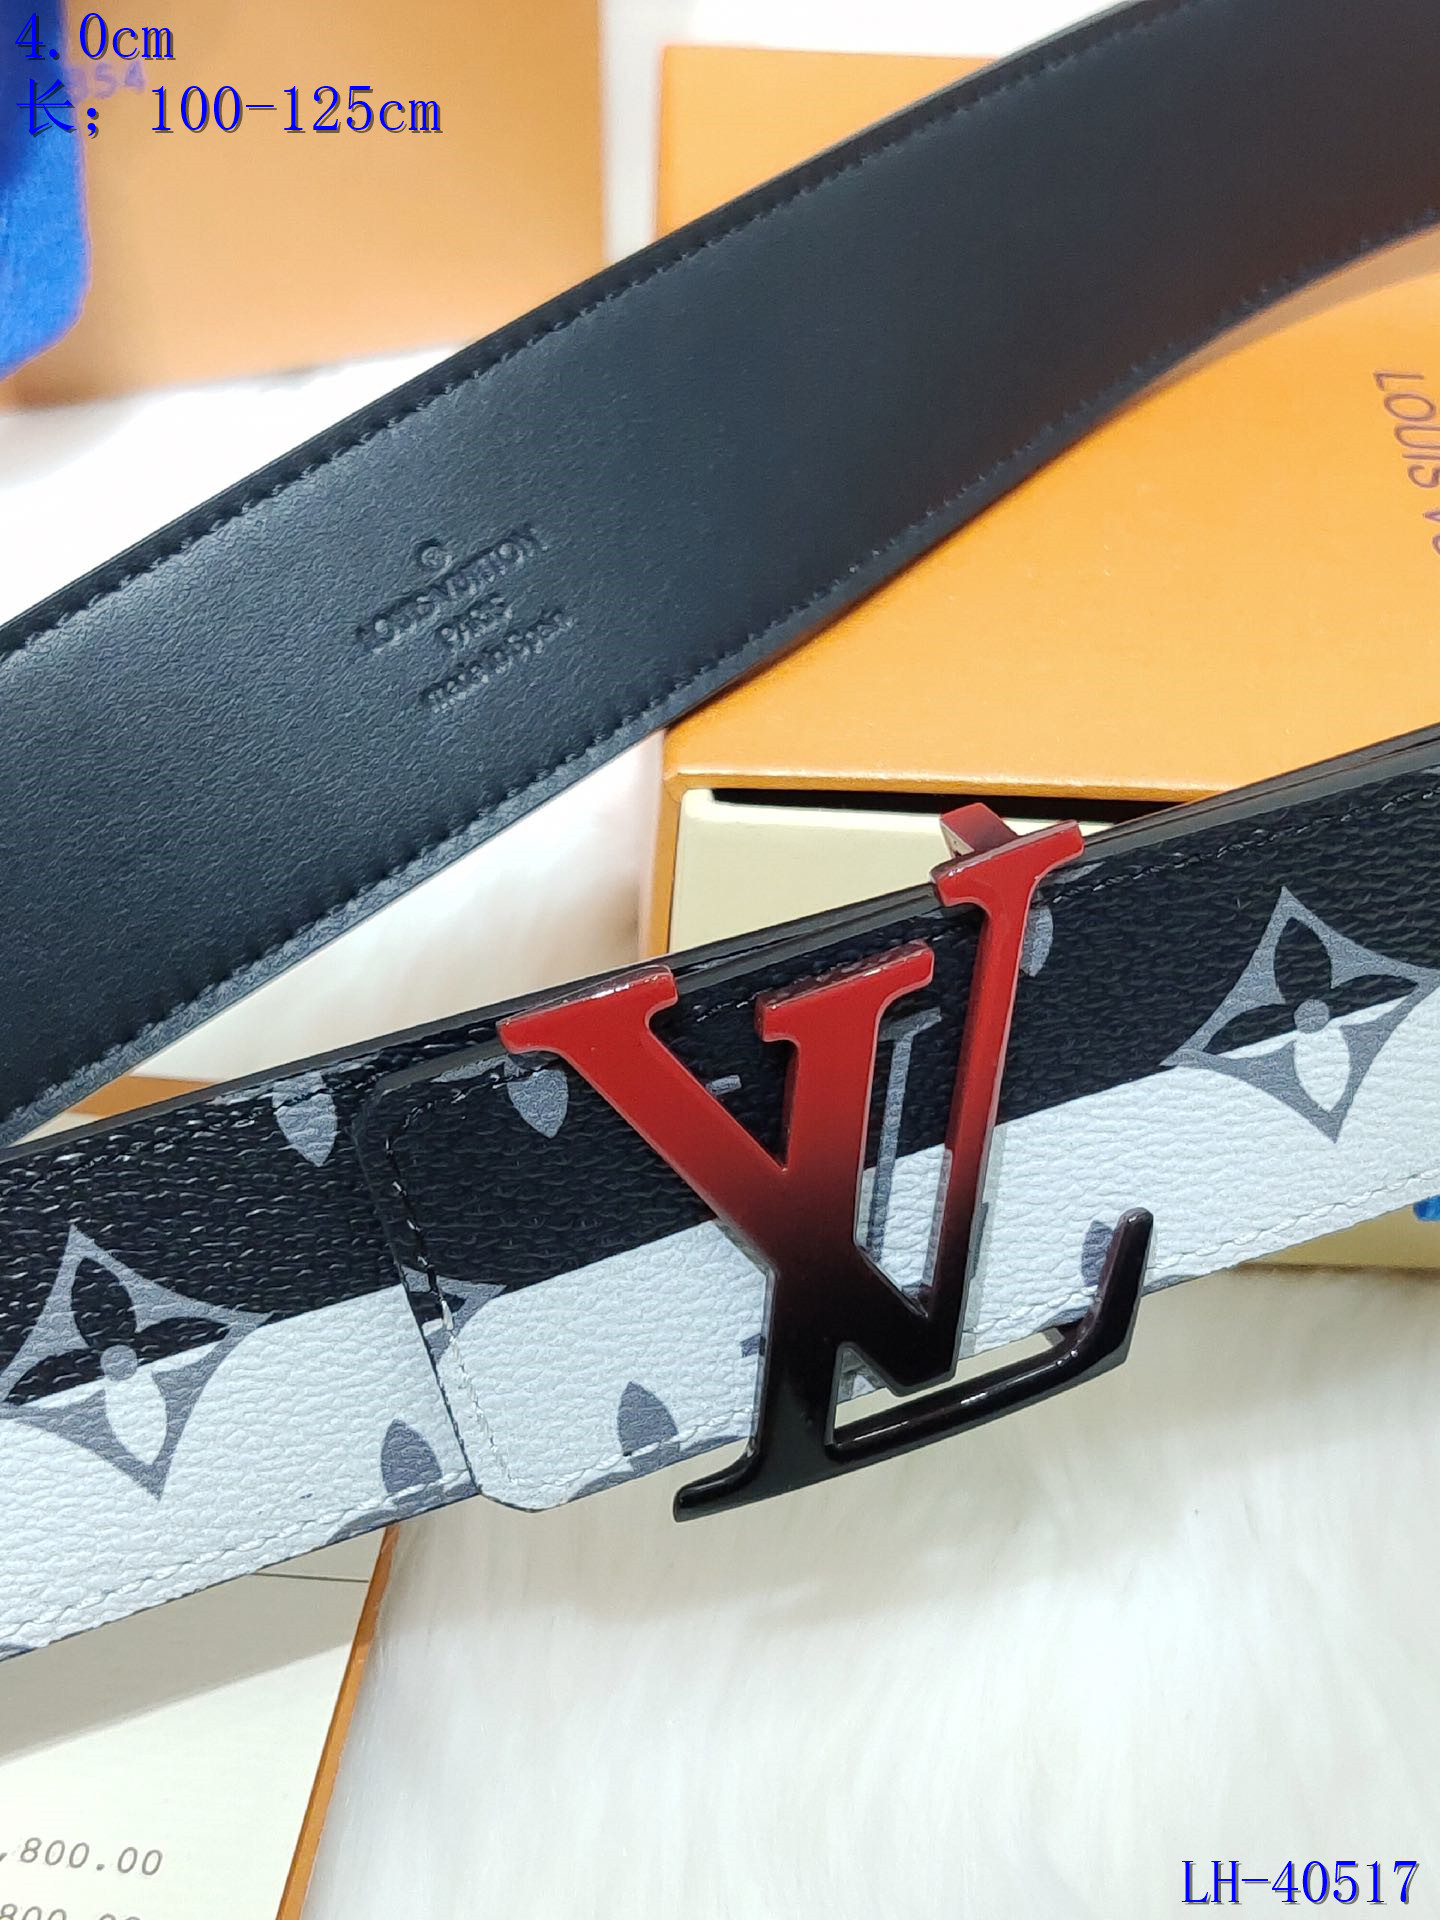 What is your opinion on the quality of Louis Vuitton (LV) belts